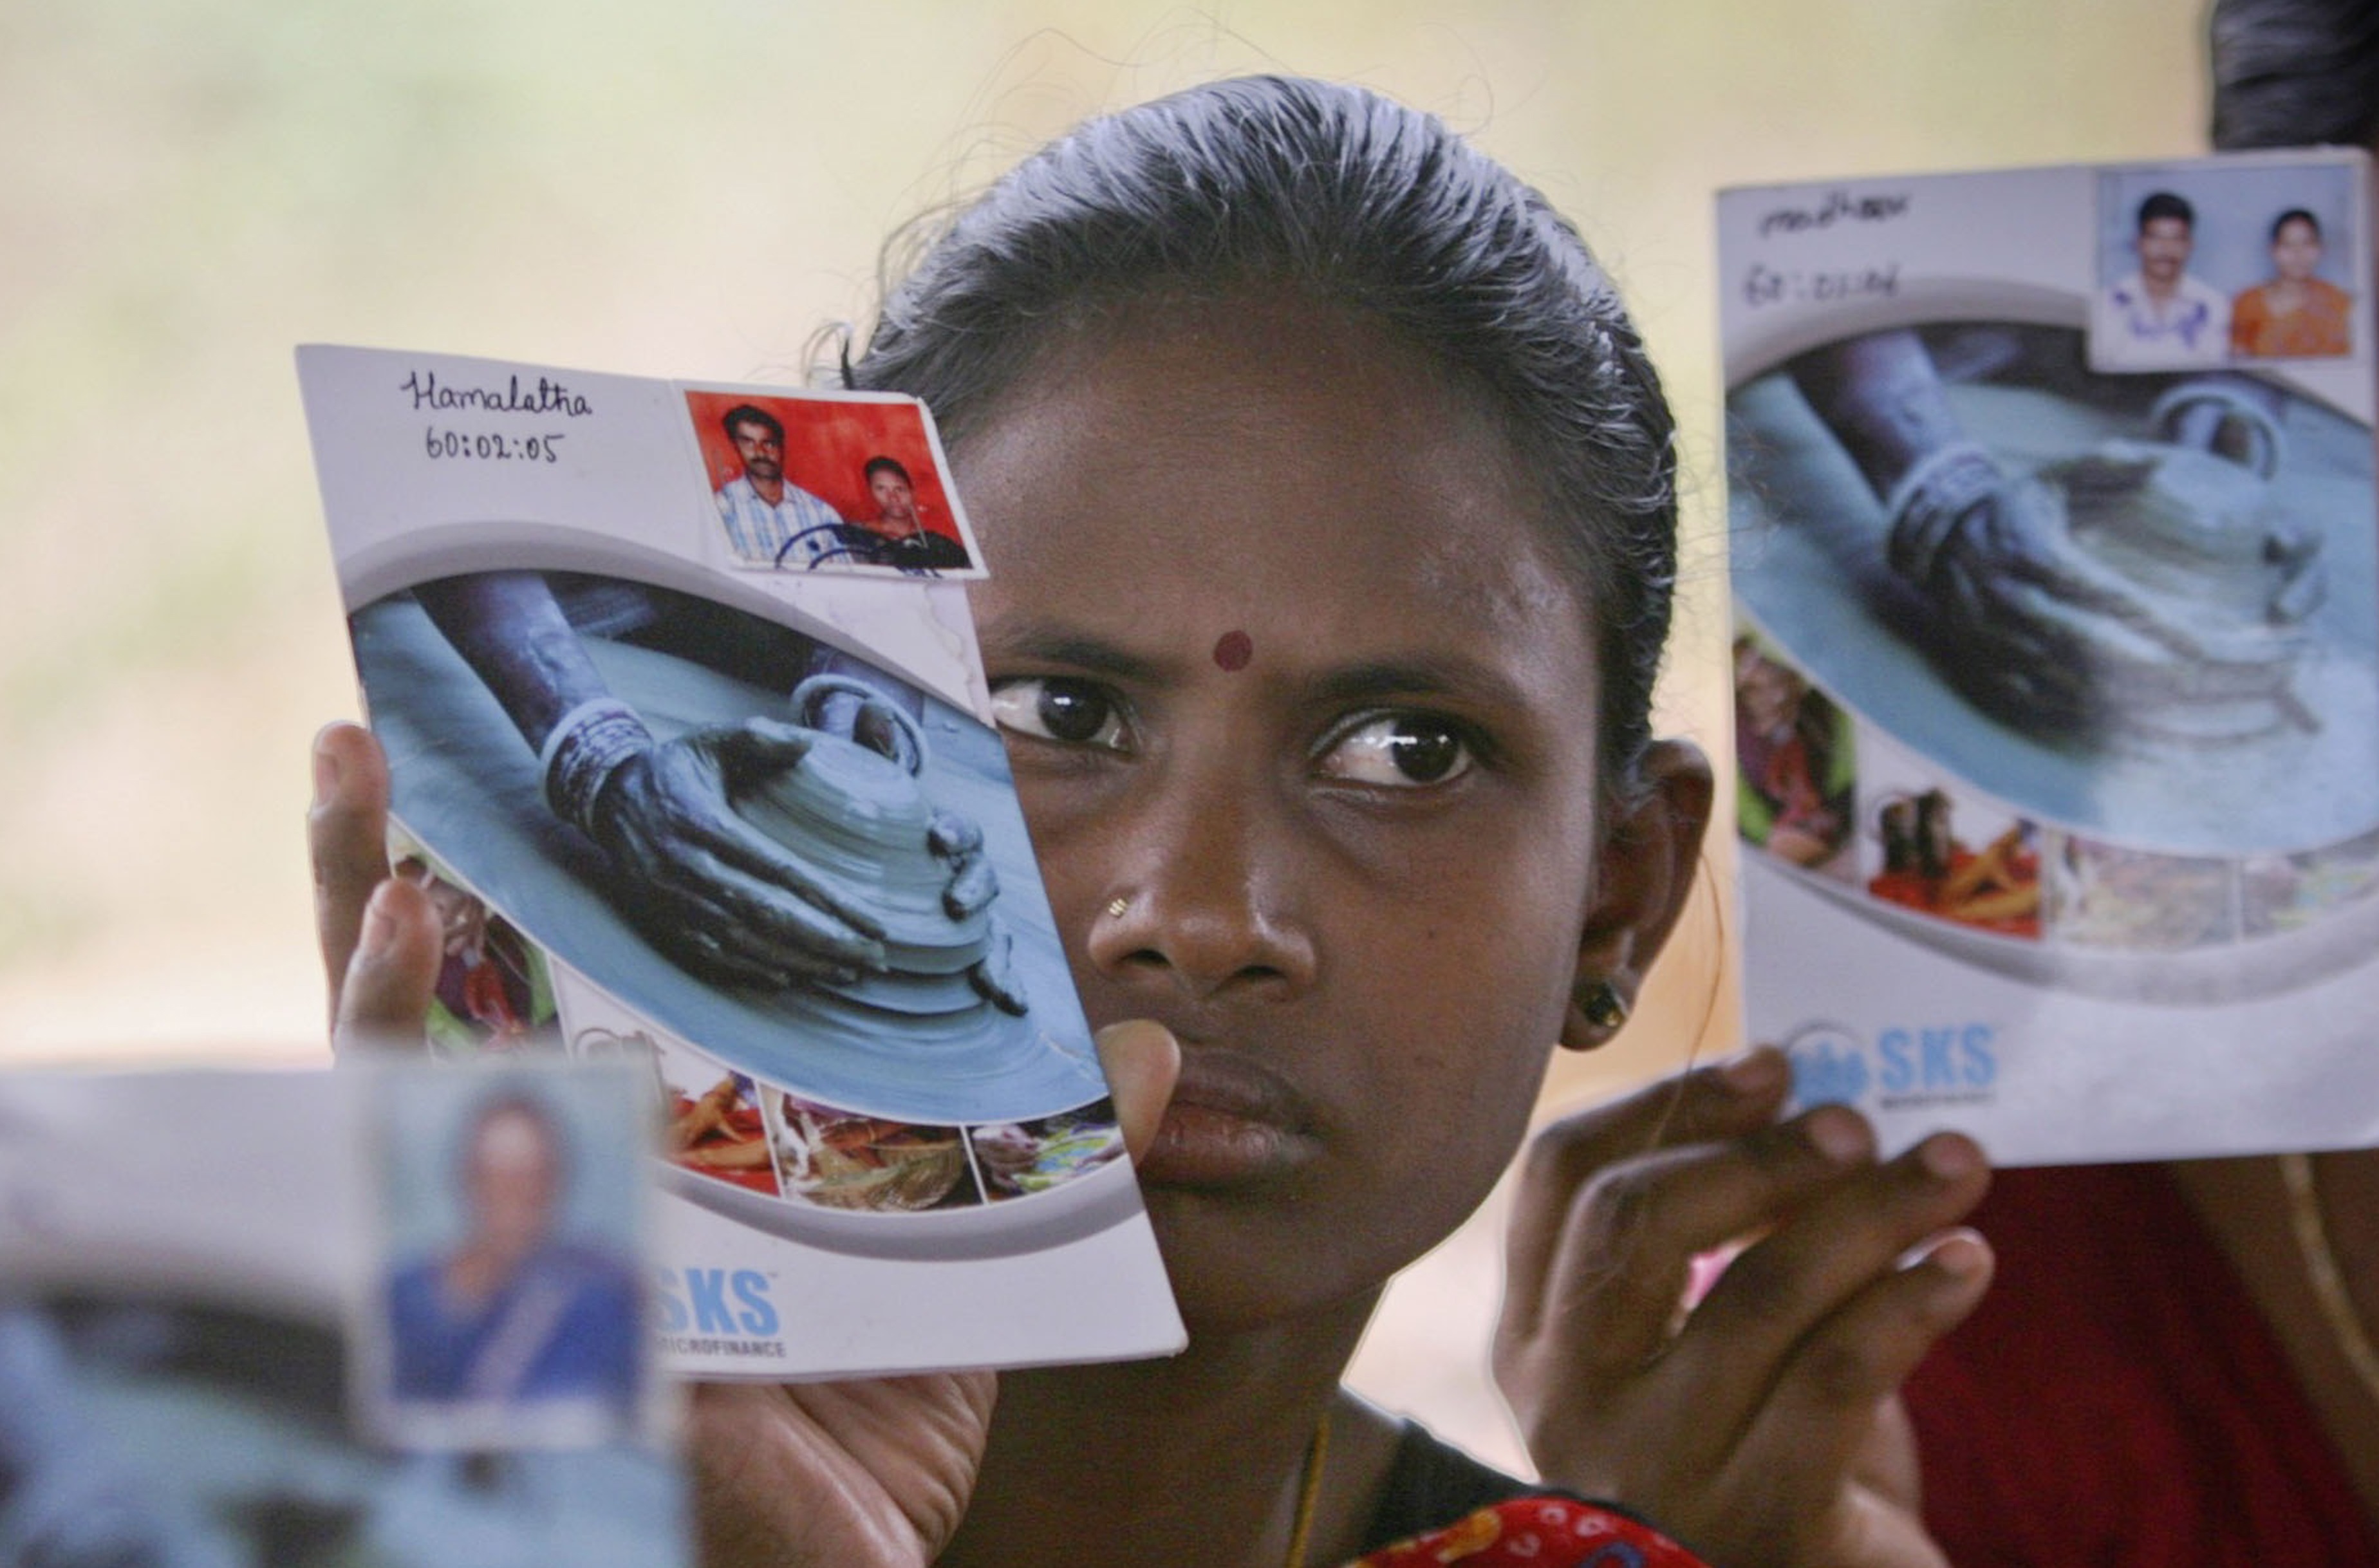 Hemalatha and other loan borrowers show pass books given to them by a micro finance company at Ibrahimpatnam, on outskirts of the southern Indian city of Hyderabad, May 19, 2011. Photo: Reuters